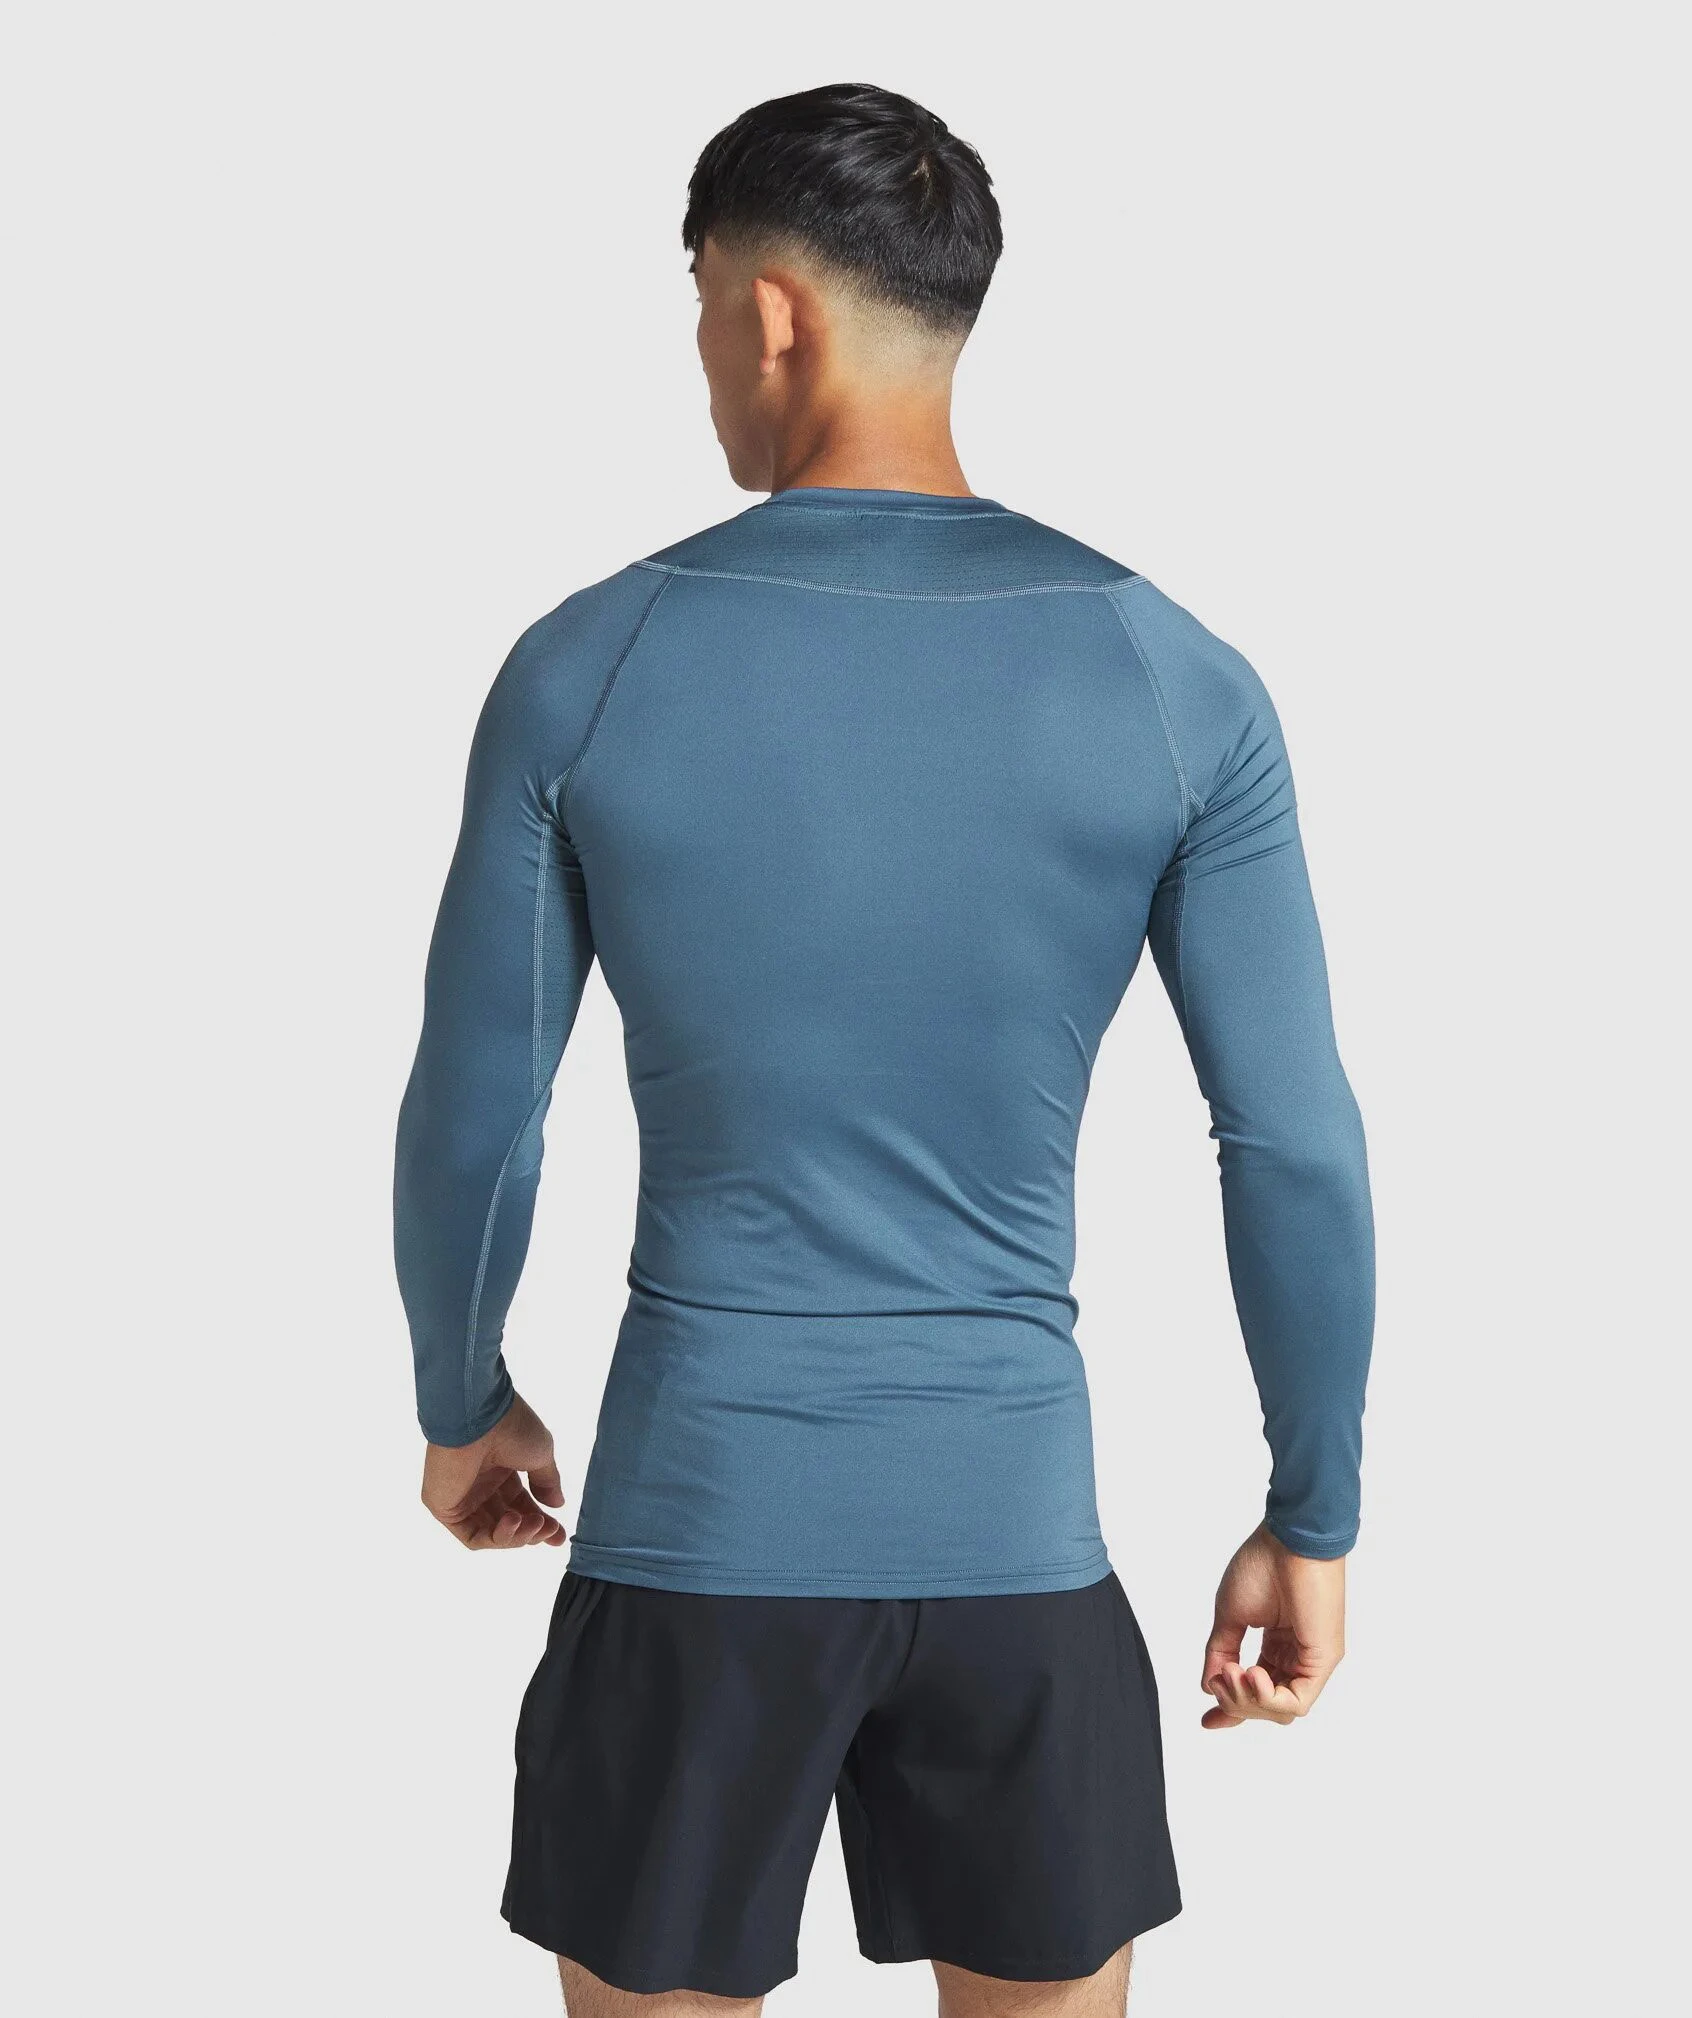 New blank Compression shirt Mens Under Base Layer Top Tight short Sleeve T-Shirts